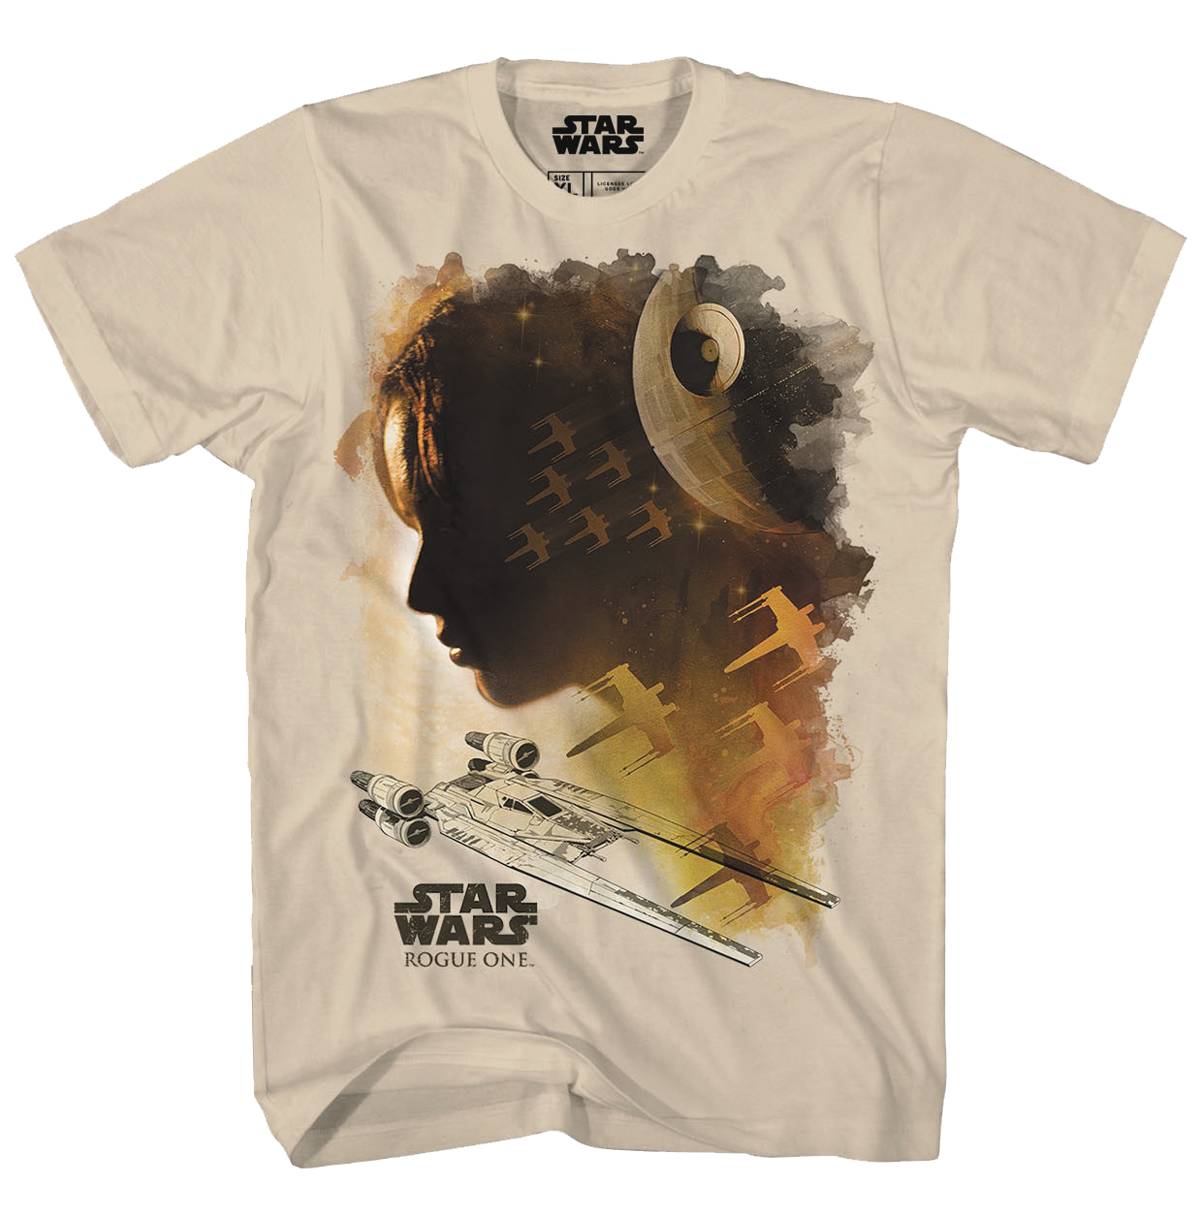 Star Wars Rogue Water Colors Sand T-Shirt Small